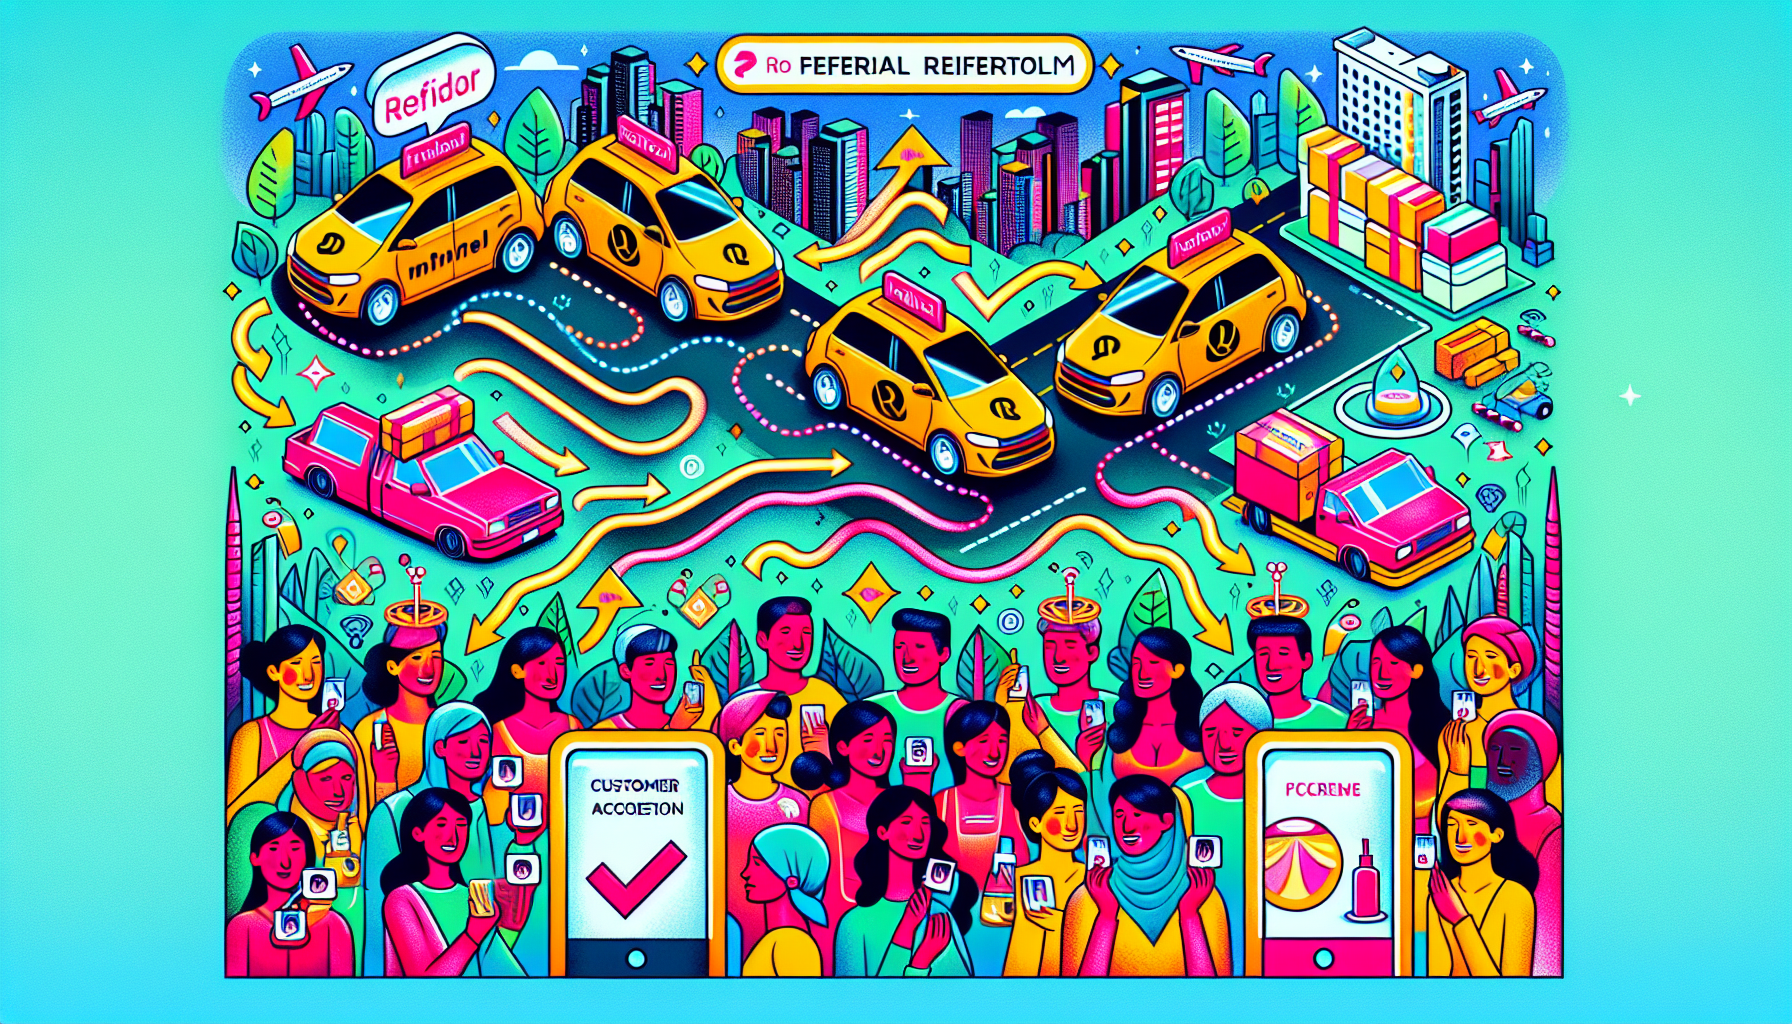 Illustration of successful referral marketing examples like Uber, Amazon Prime, and Glossier